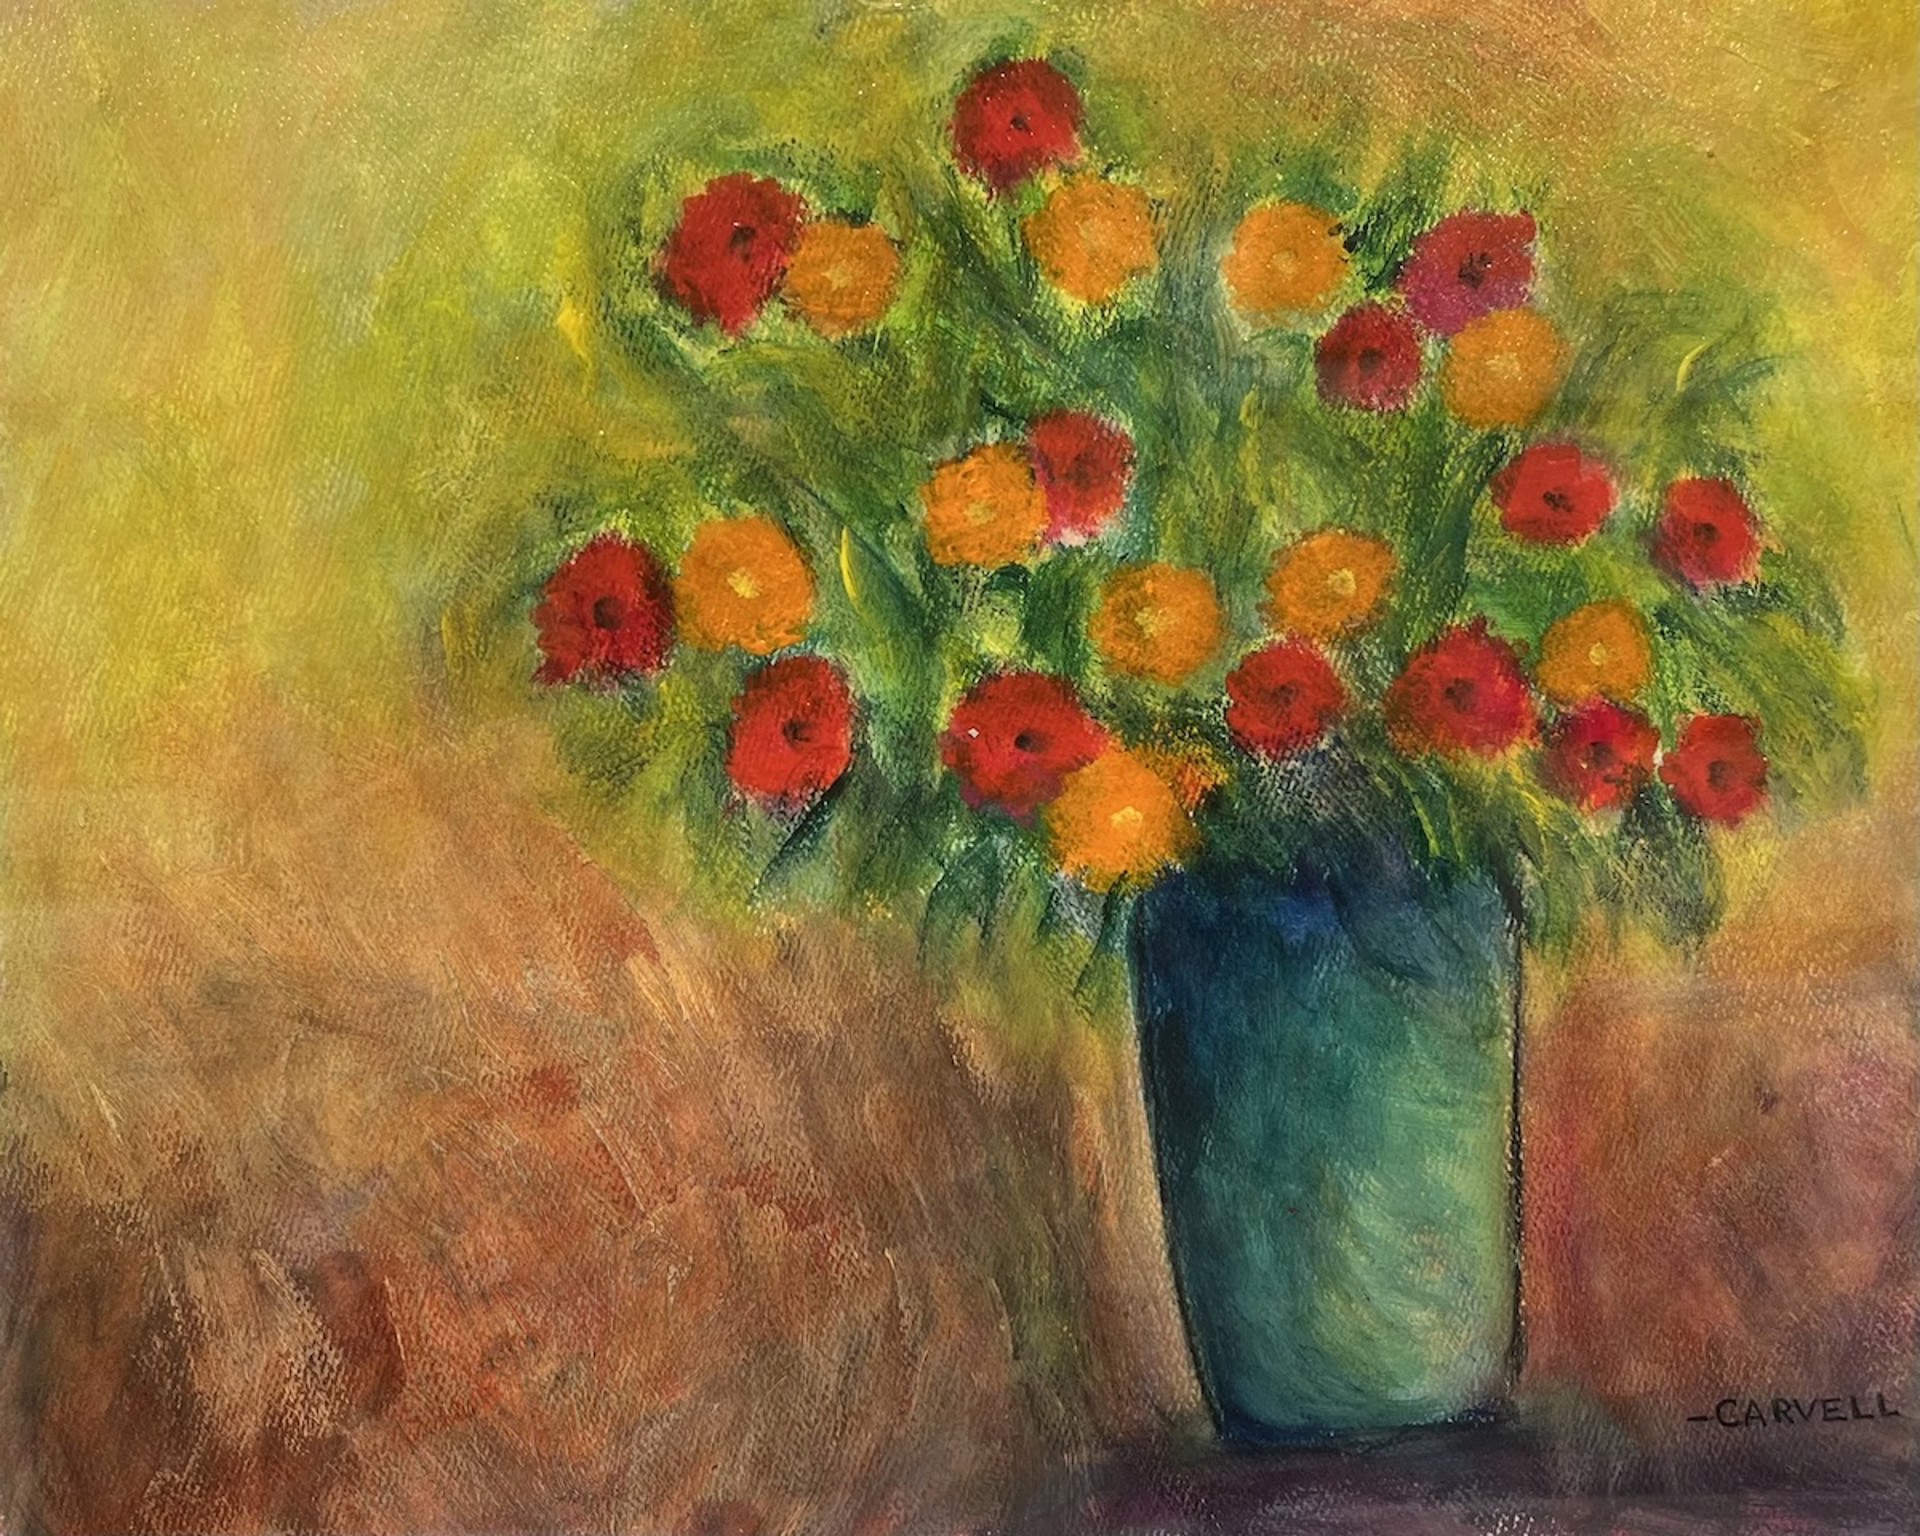 Scattered Bouquet by Fred Carvell